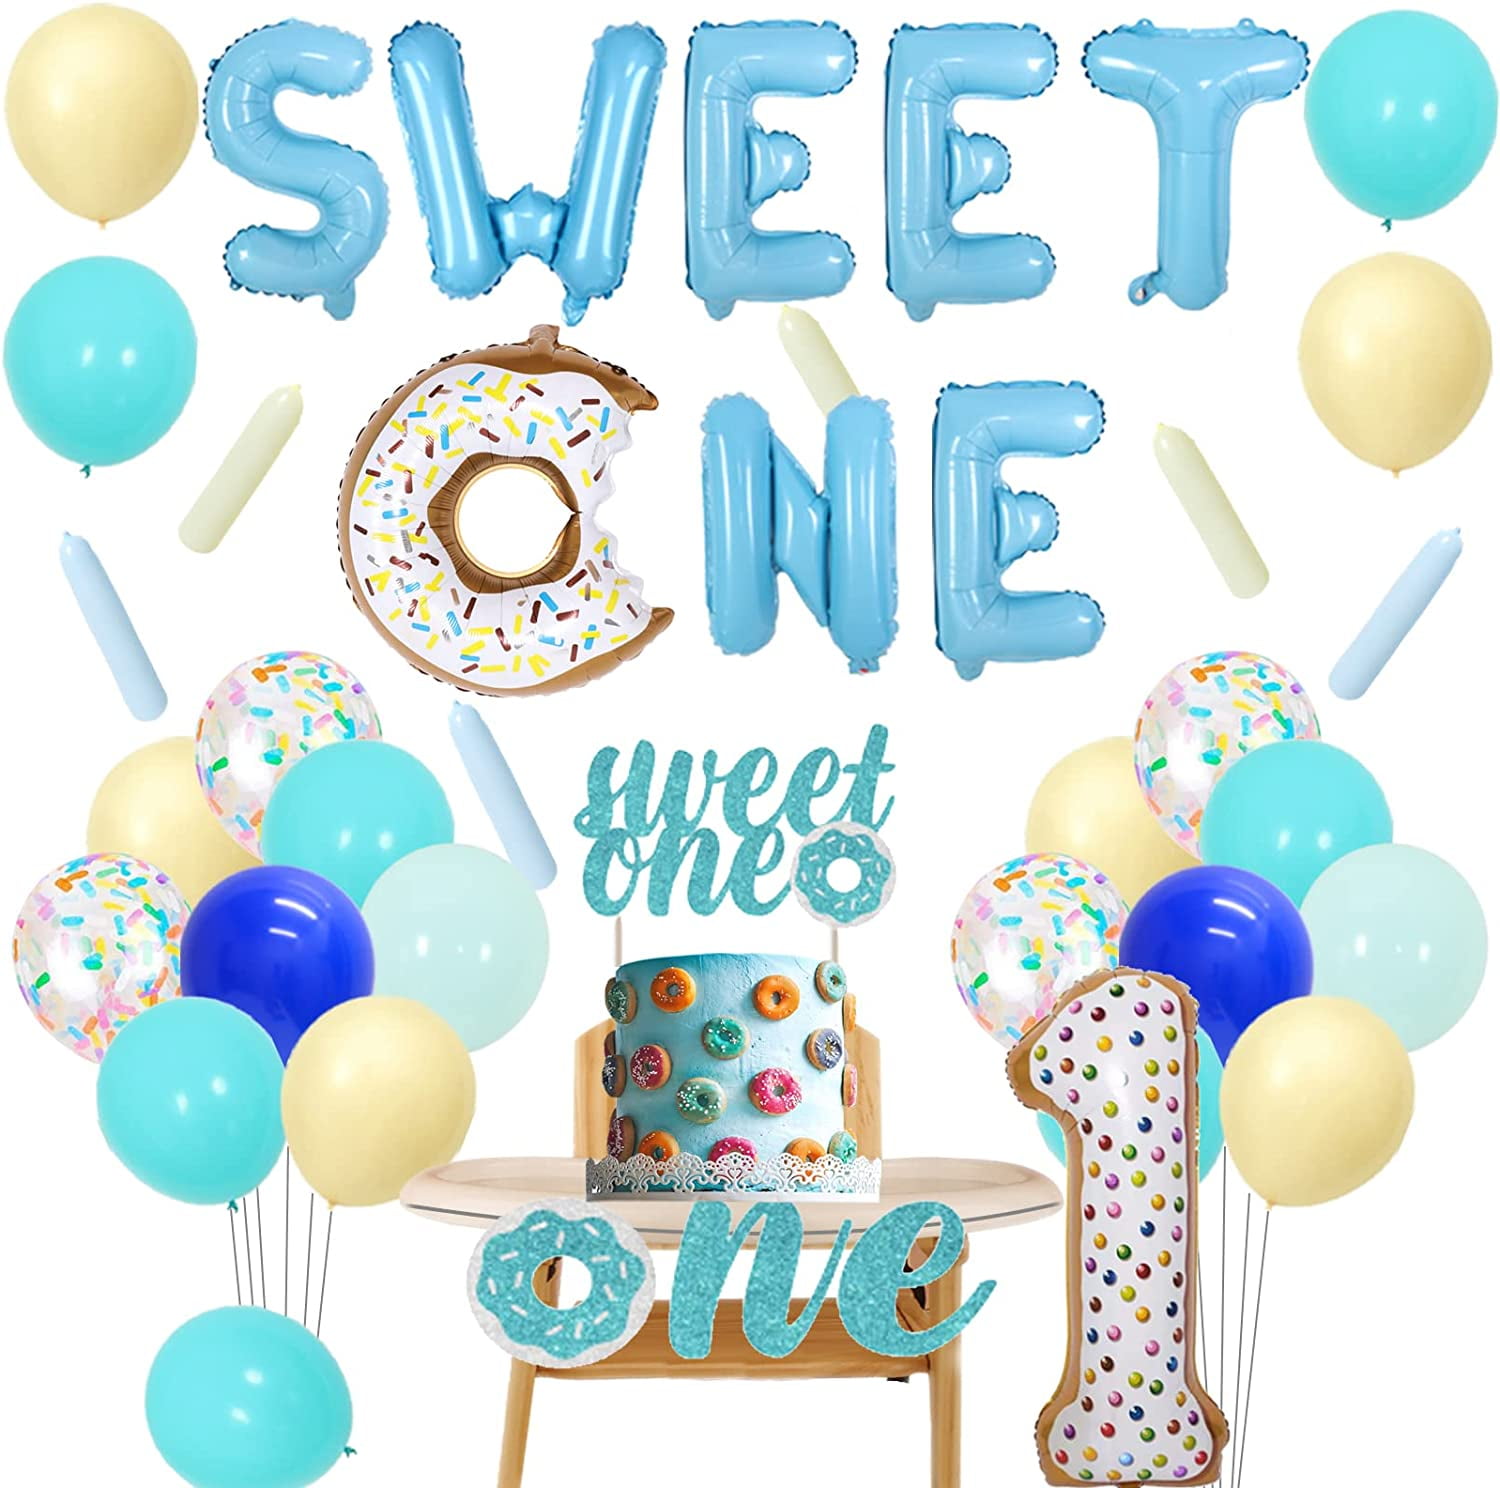 Baby Sprinkle Decorations, Sprinkle Party Pack, Baby Shower Party Kit  INSTANT DOWNLOAD Printable Editable PDF BB01 